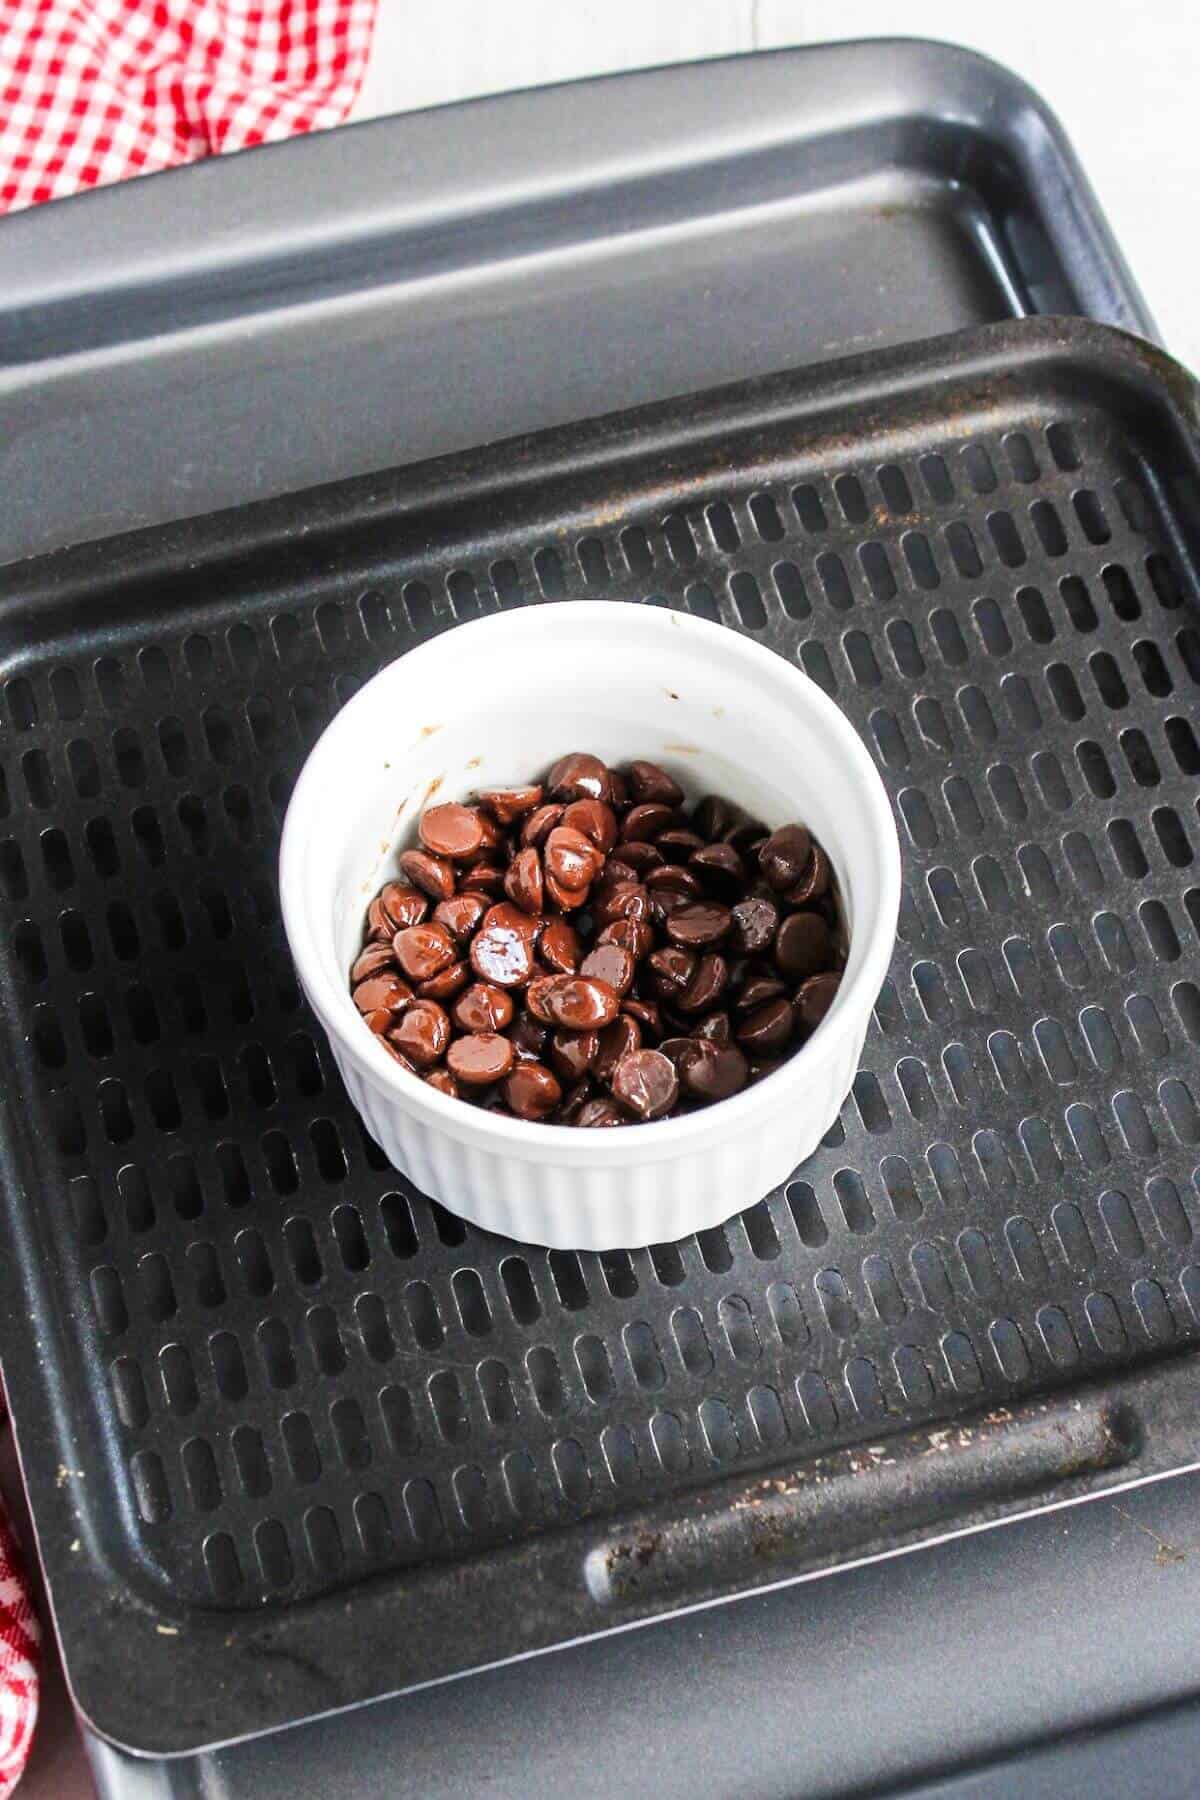 Chocolate chips in a bowl on an air fryer tray.